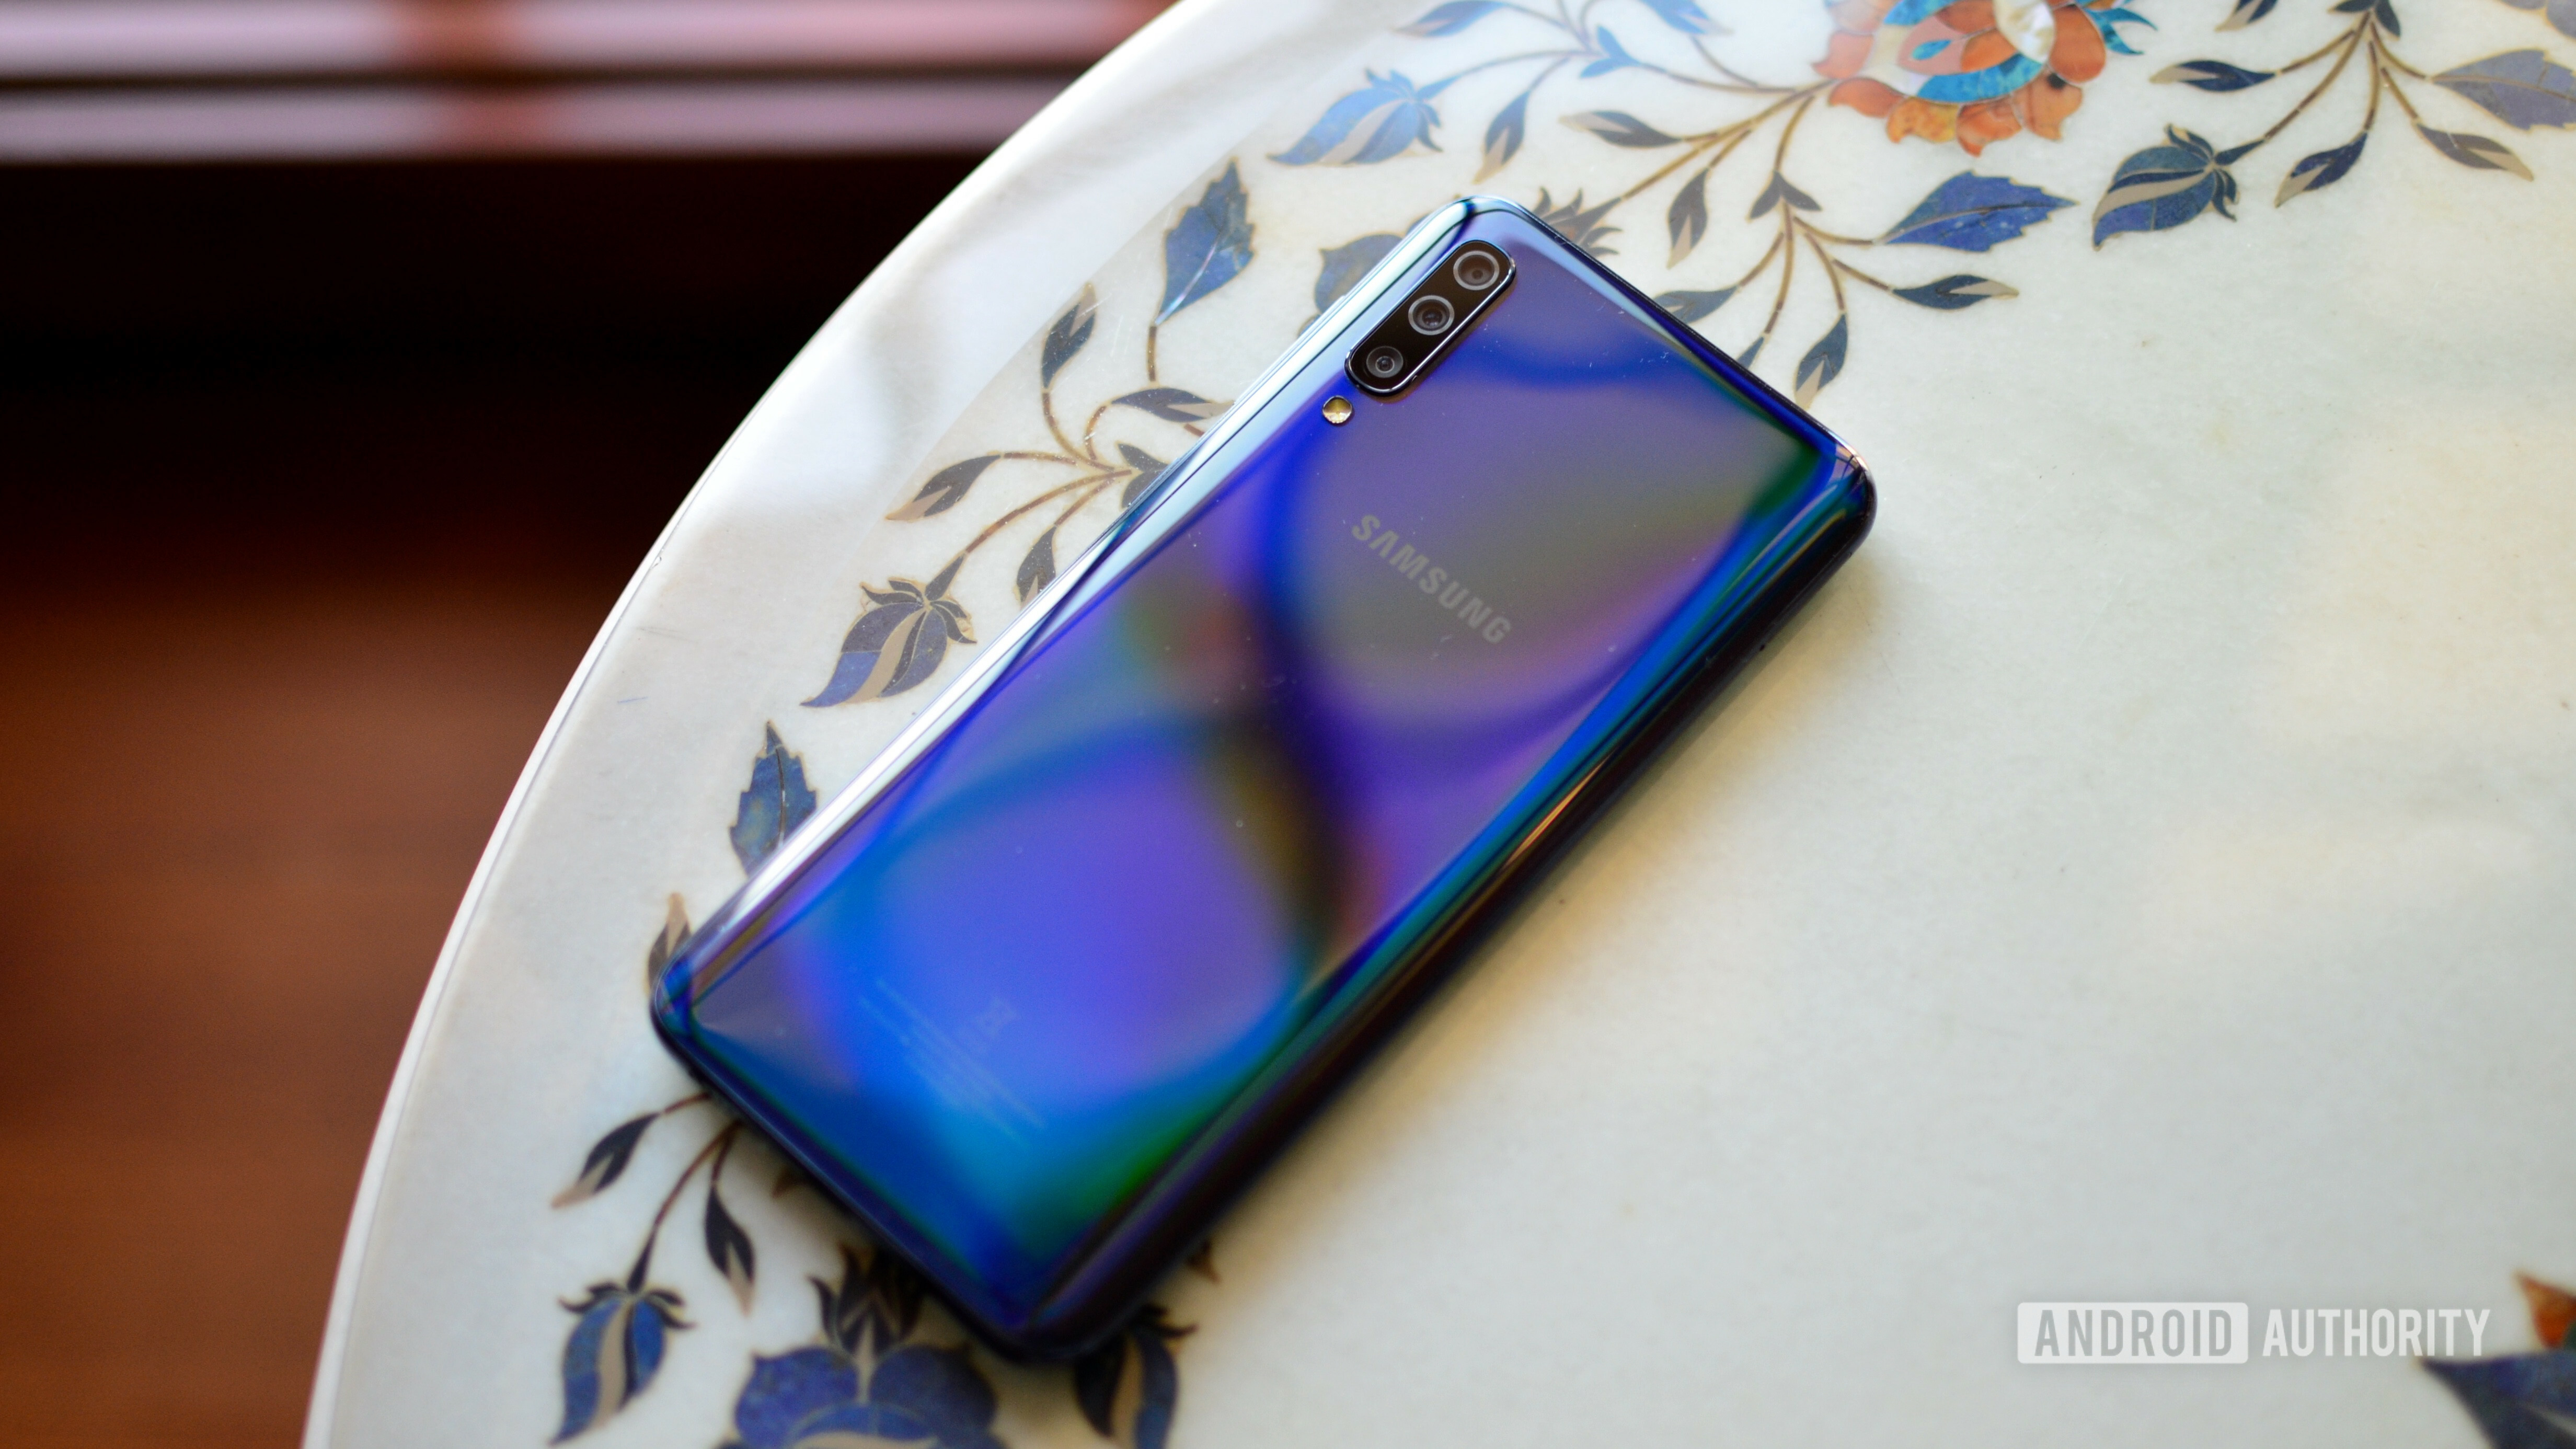 Back side of the Samsung Galaxy A50